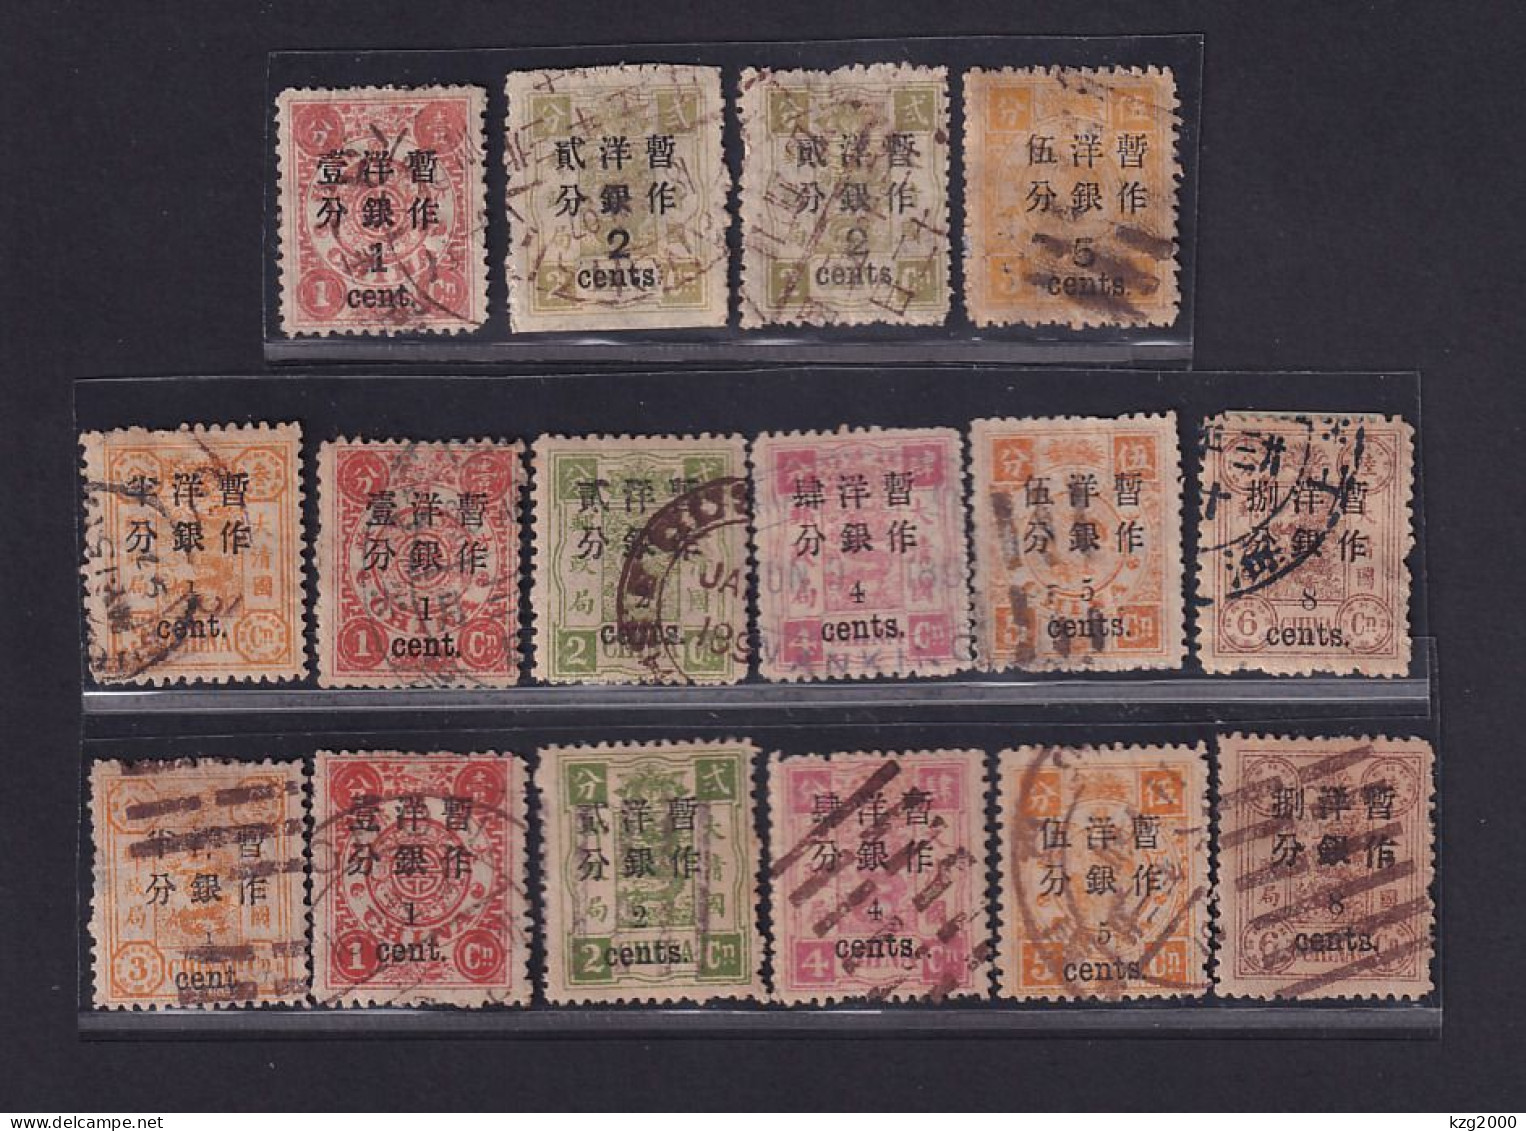 Qing Dynasty China Stamp 1897 Cixi‘s Birthday Commemorative Surcharged 16 Used Stamps - Usados